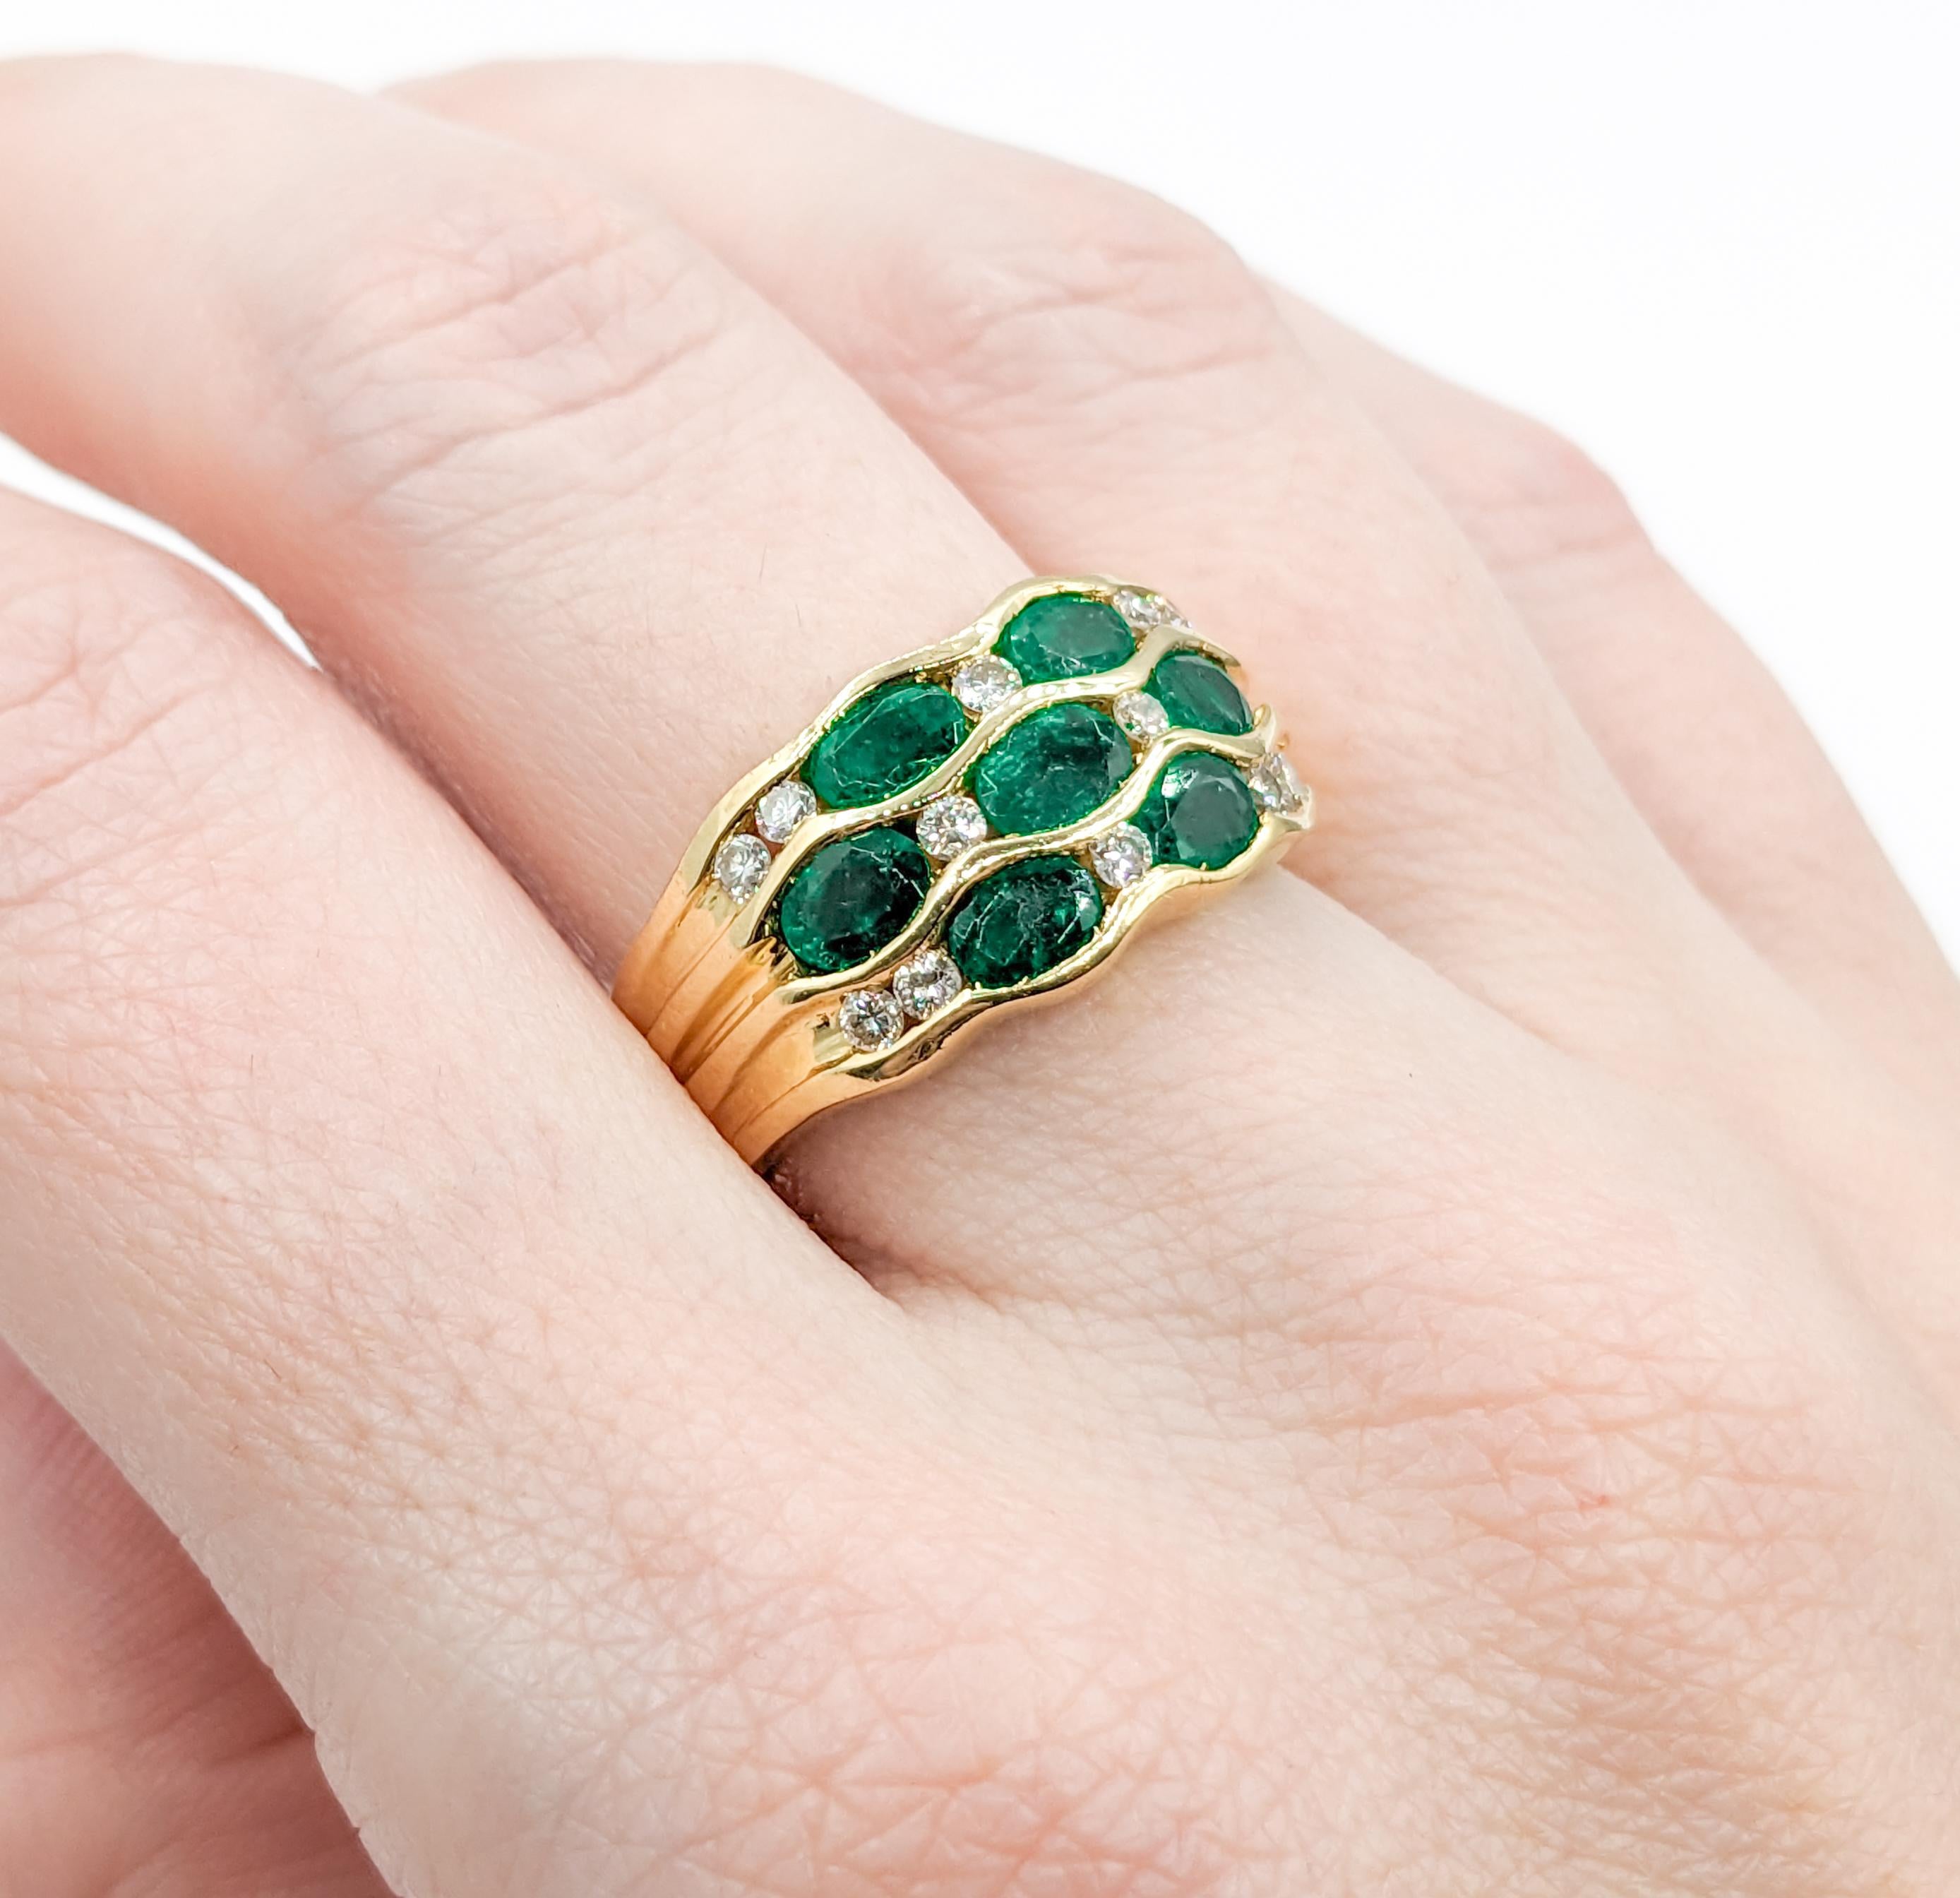 Oval Cut Vibrant Emerald & Diamond Band Ring in 18k Gold